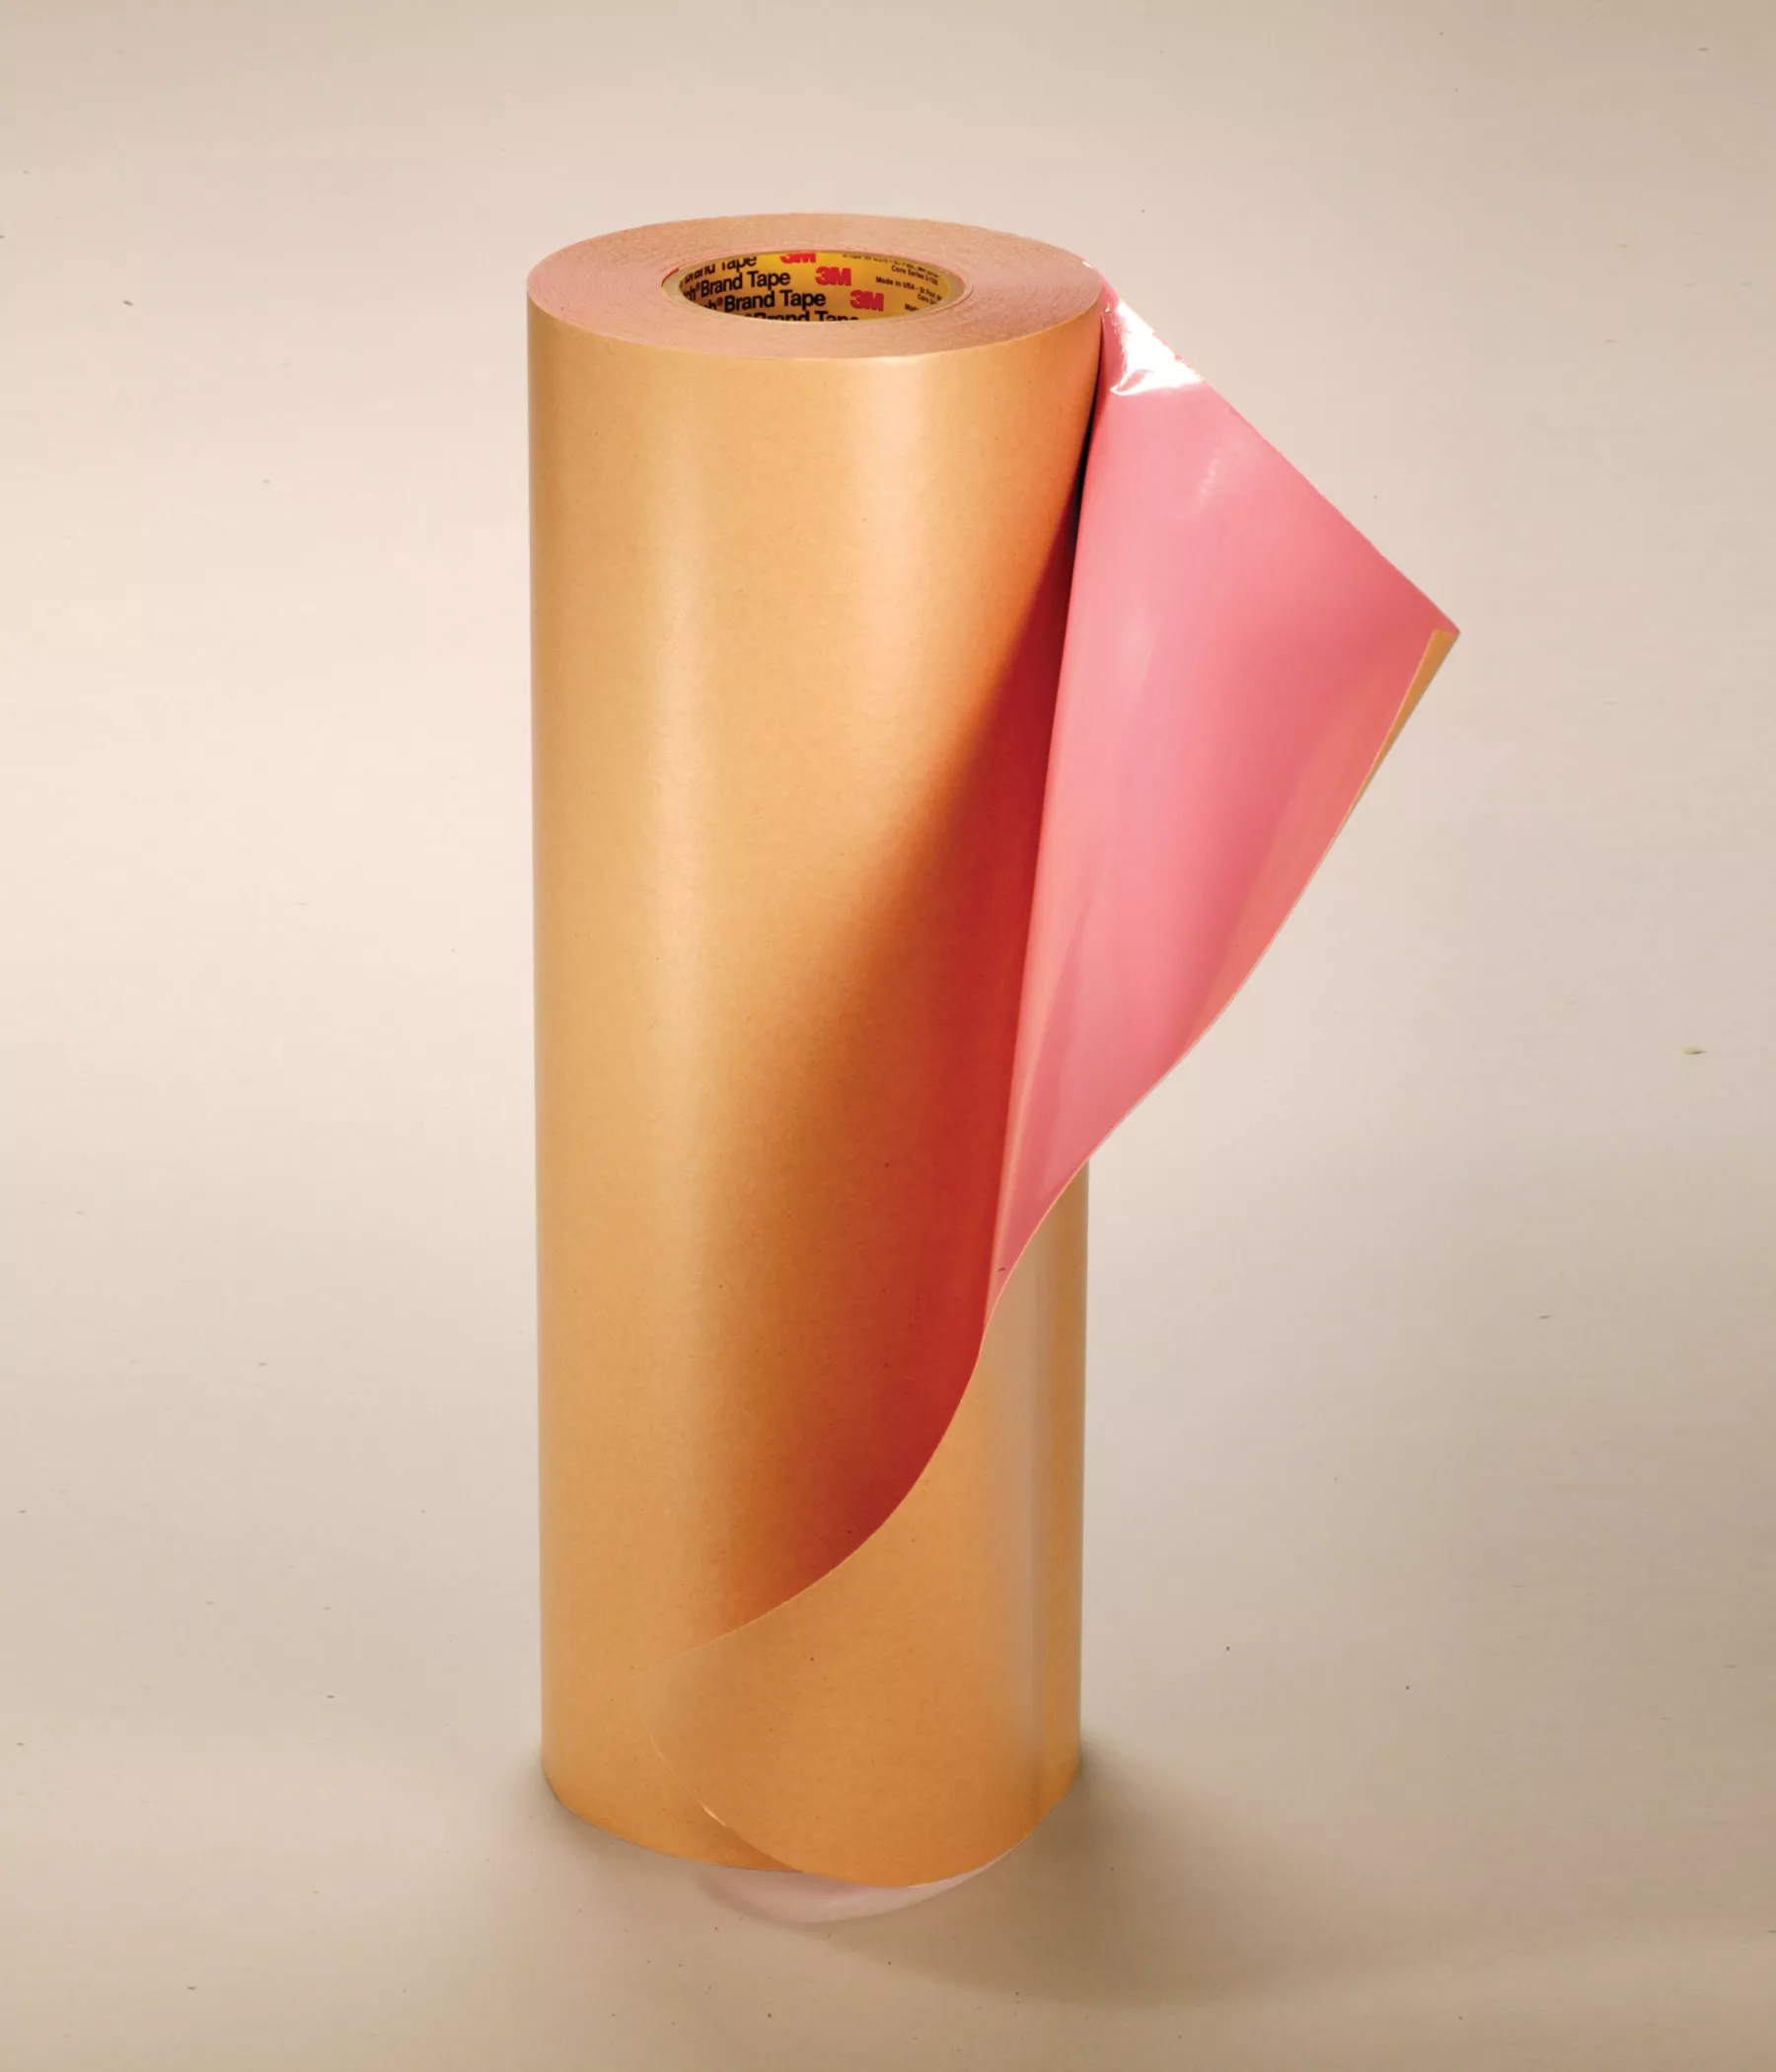 3M™ Cushion-Mount™ Plus Plate Mounting Tape E1920HS, Pink, 18 in x
25
yd, 20 mil, 1 Roll/Case